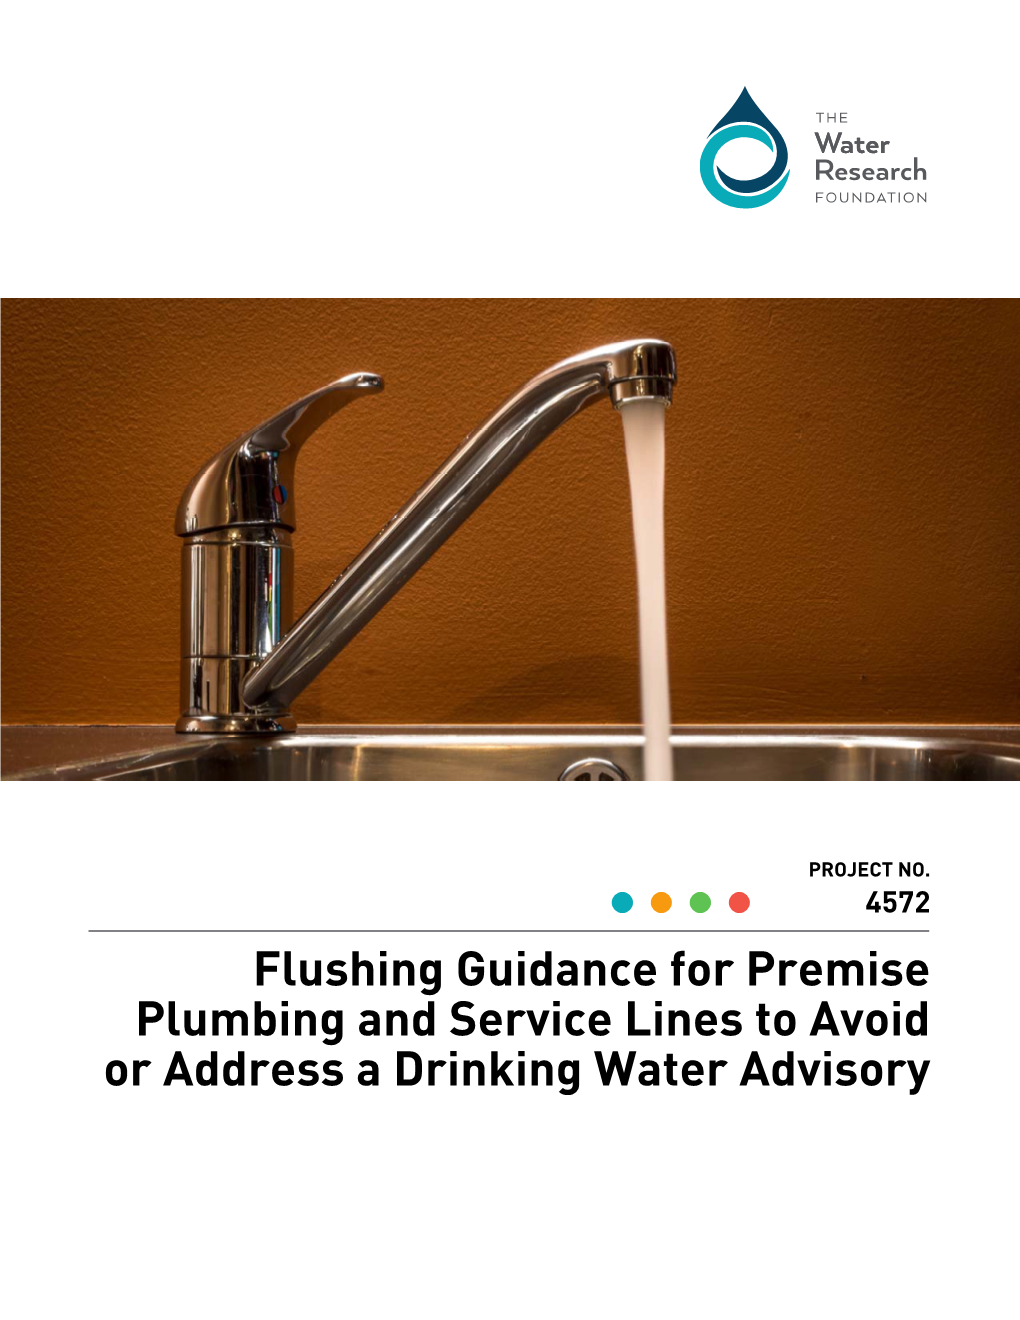 Flushing Guidance for Premise Plumbing and Service Lines to Avoid Or Address a Drinking Water Advisory